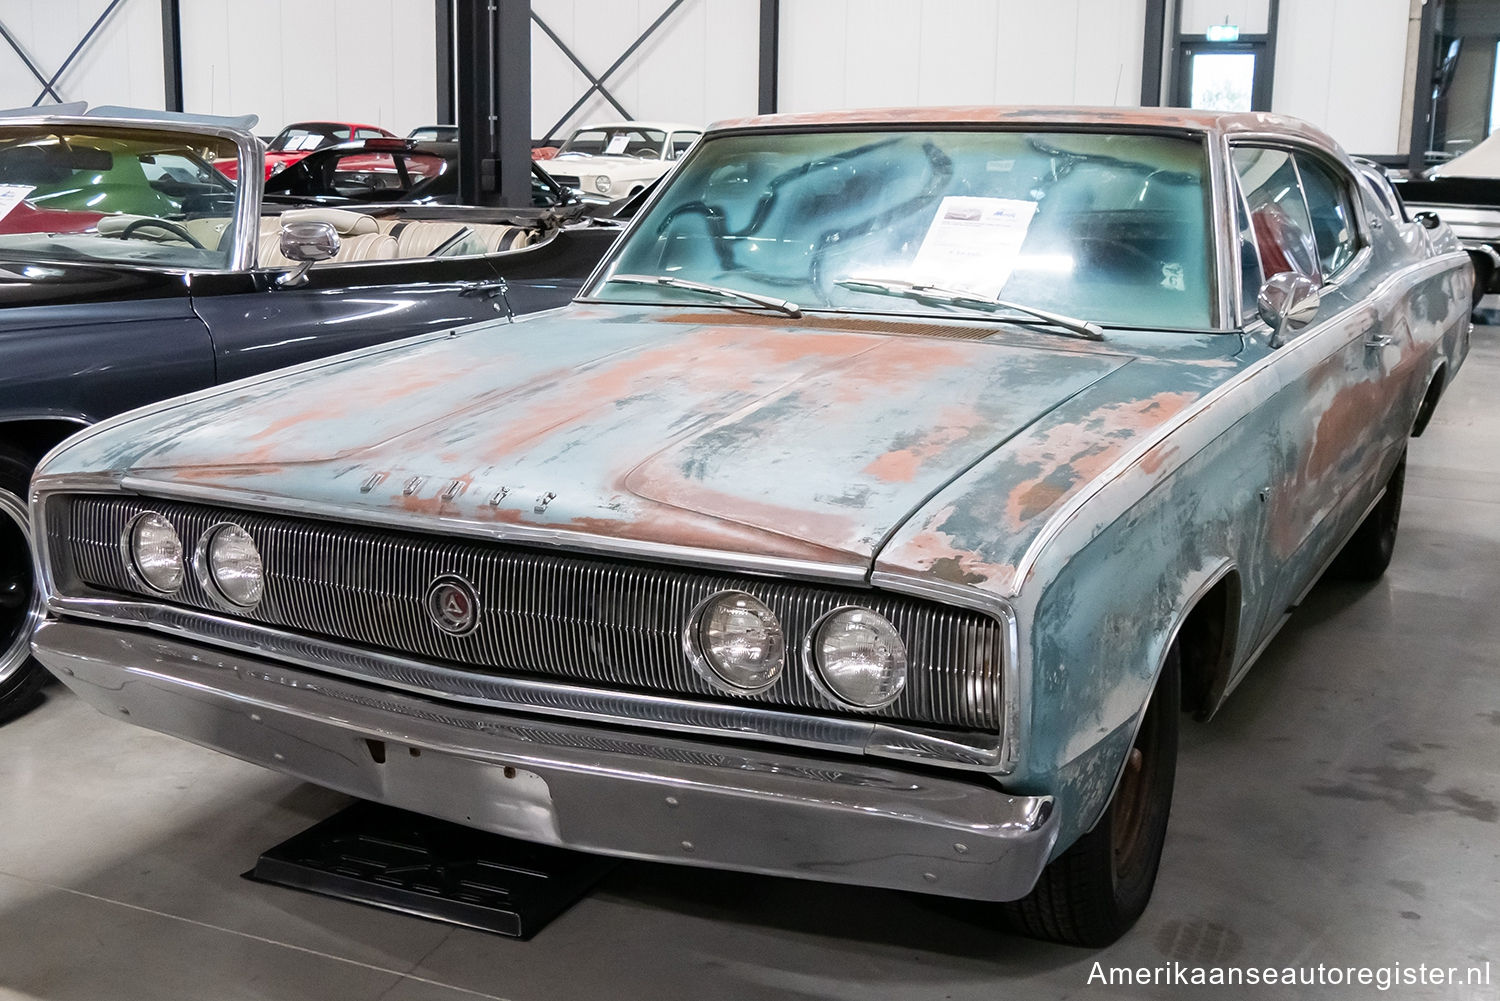 Dodge Charger uit 1966